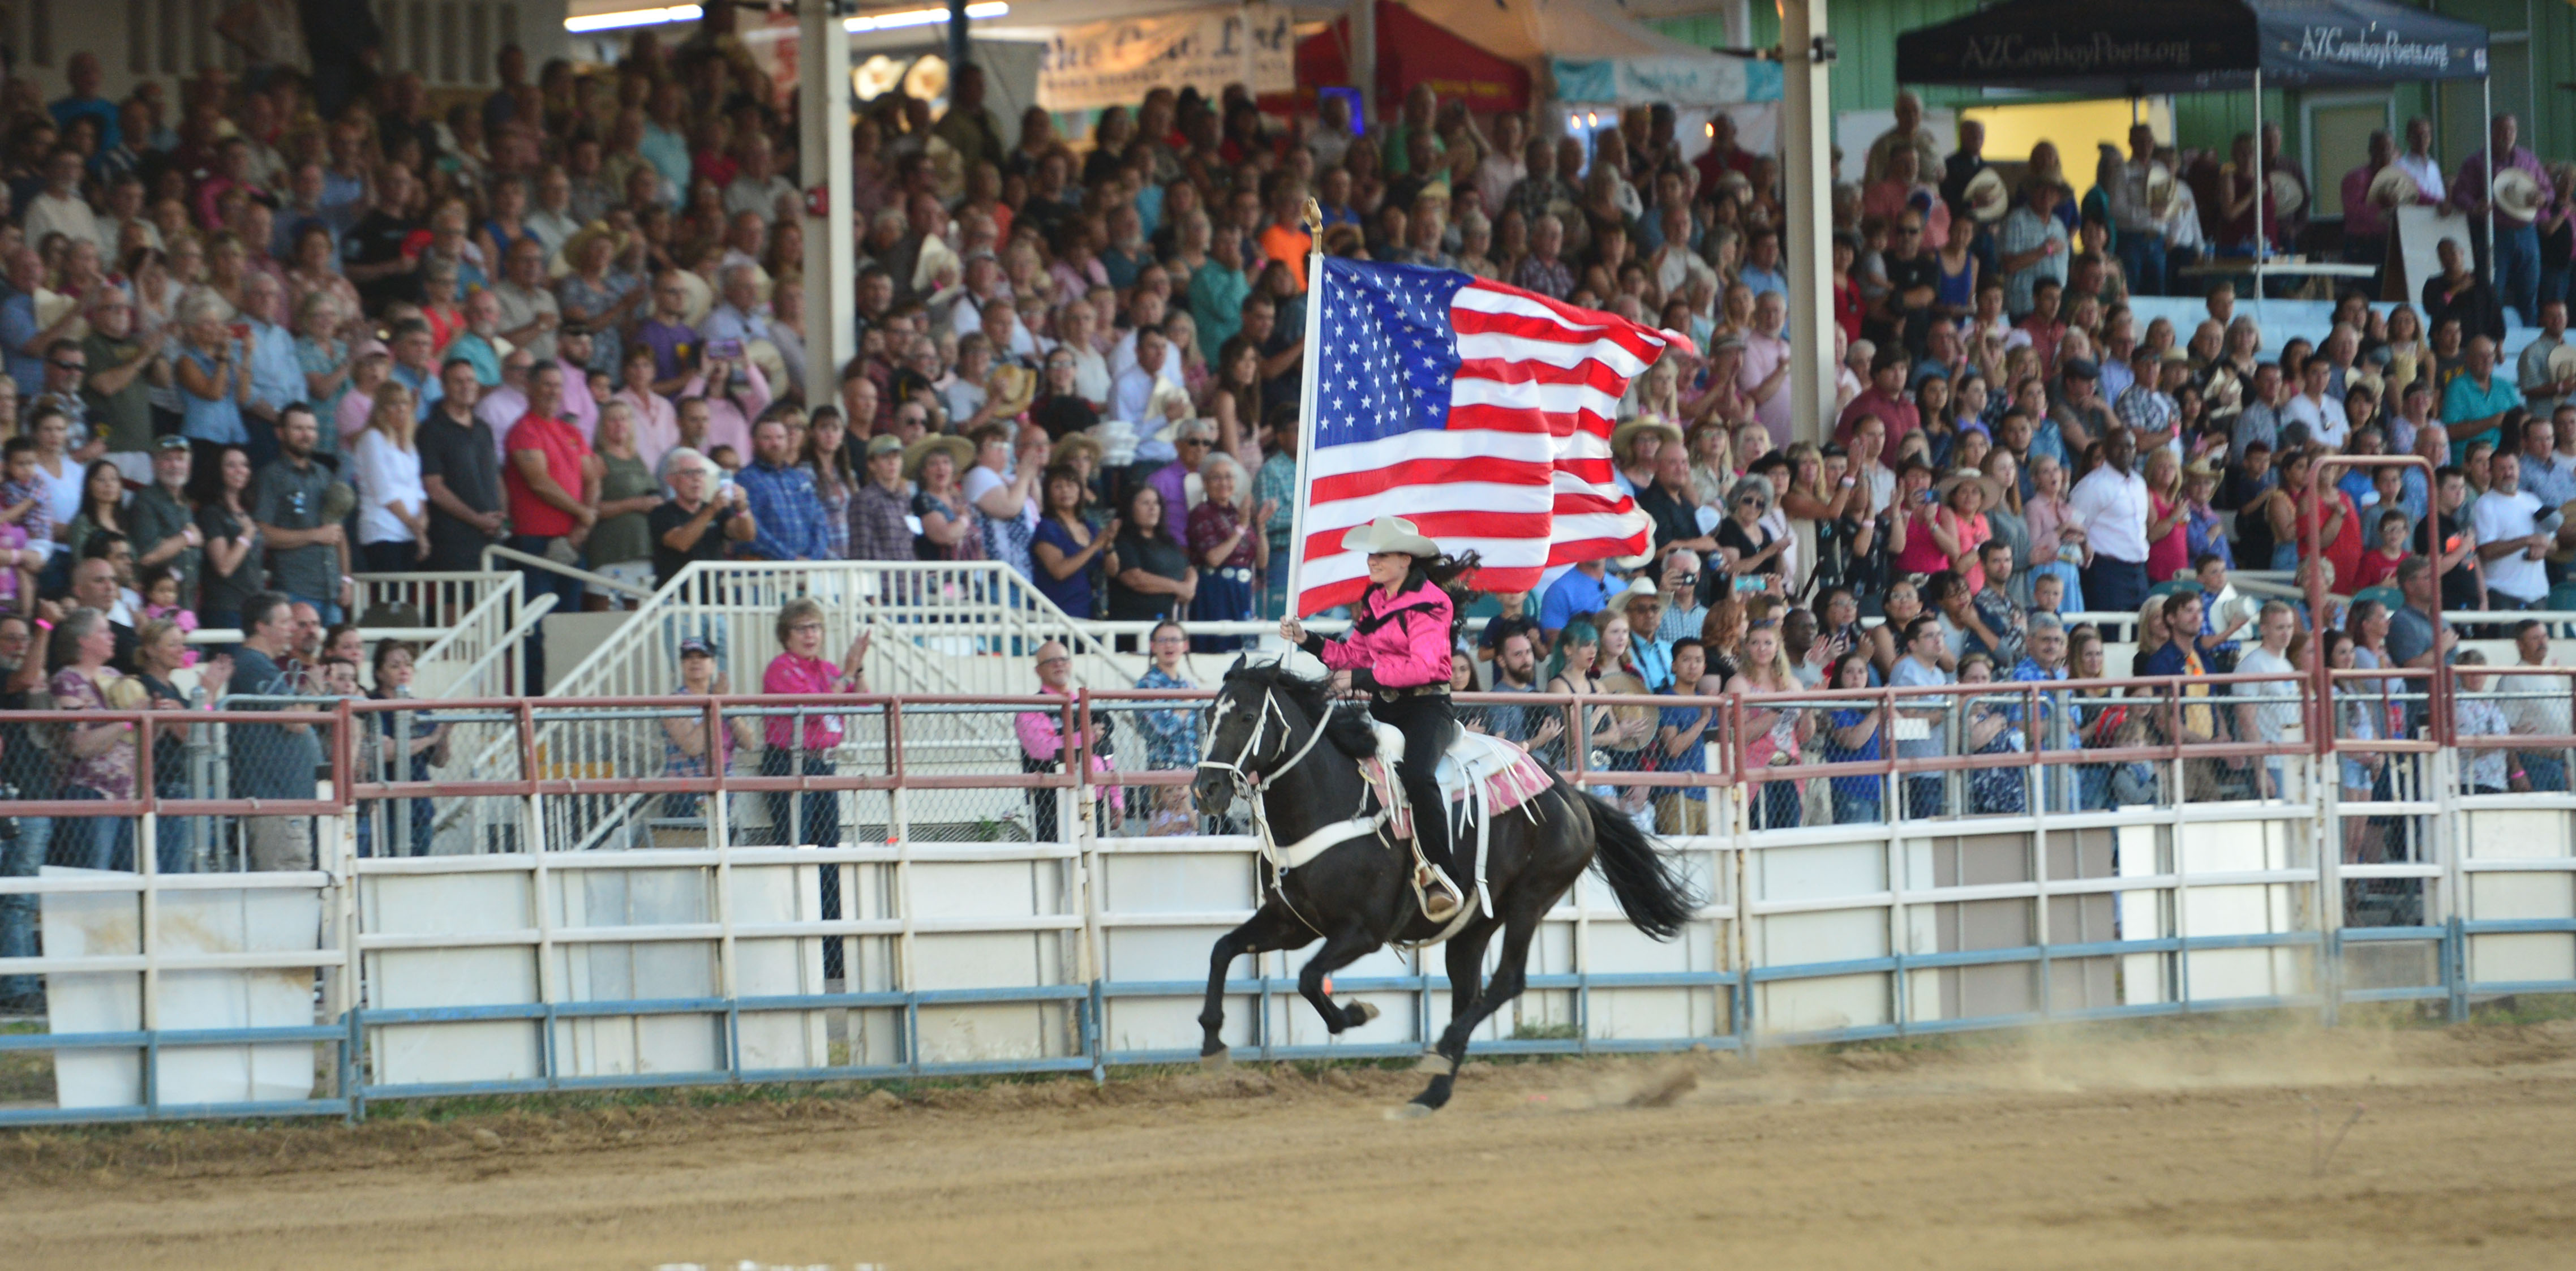 ‘World’s Oldest Rodeo’ to limit seating capacity to 25 The Daily